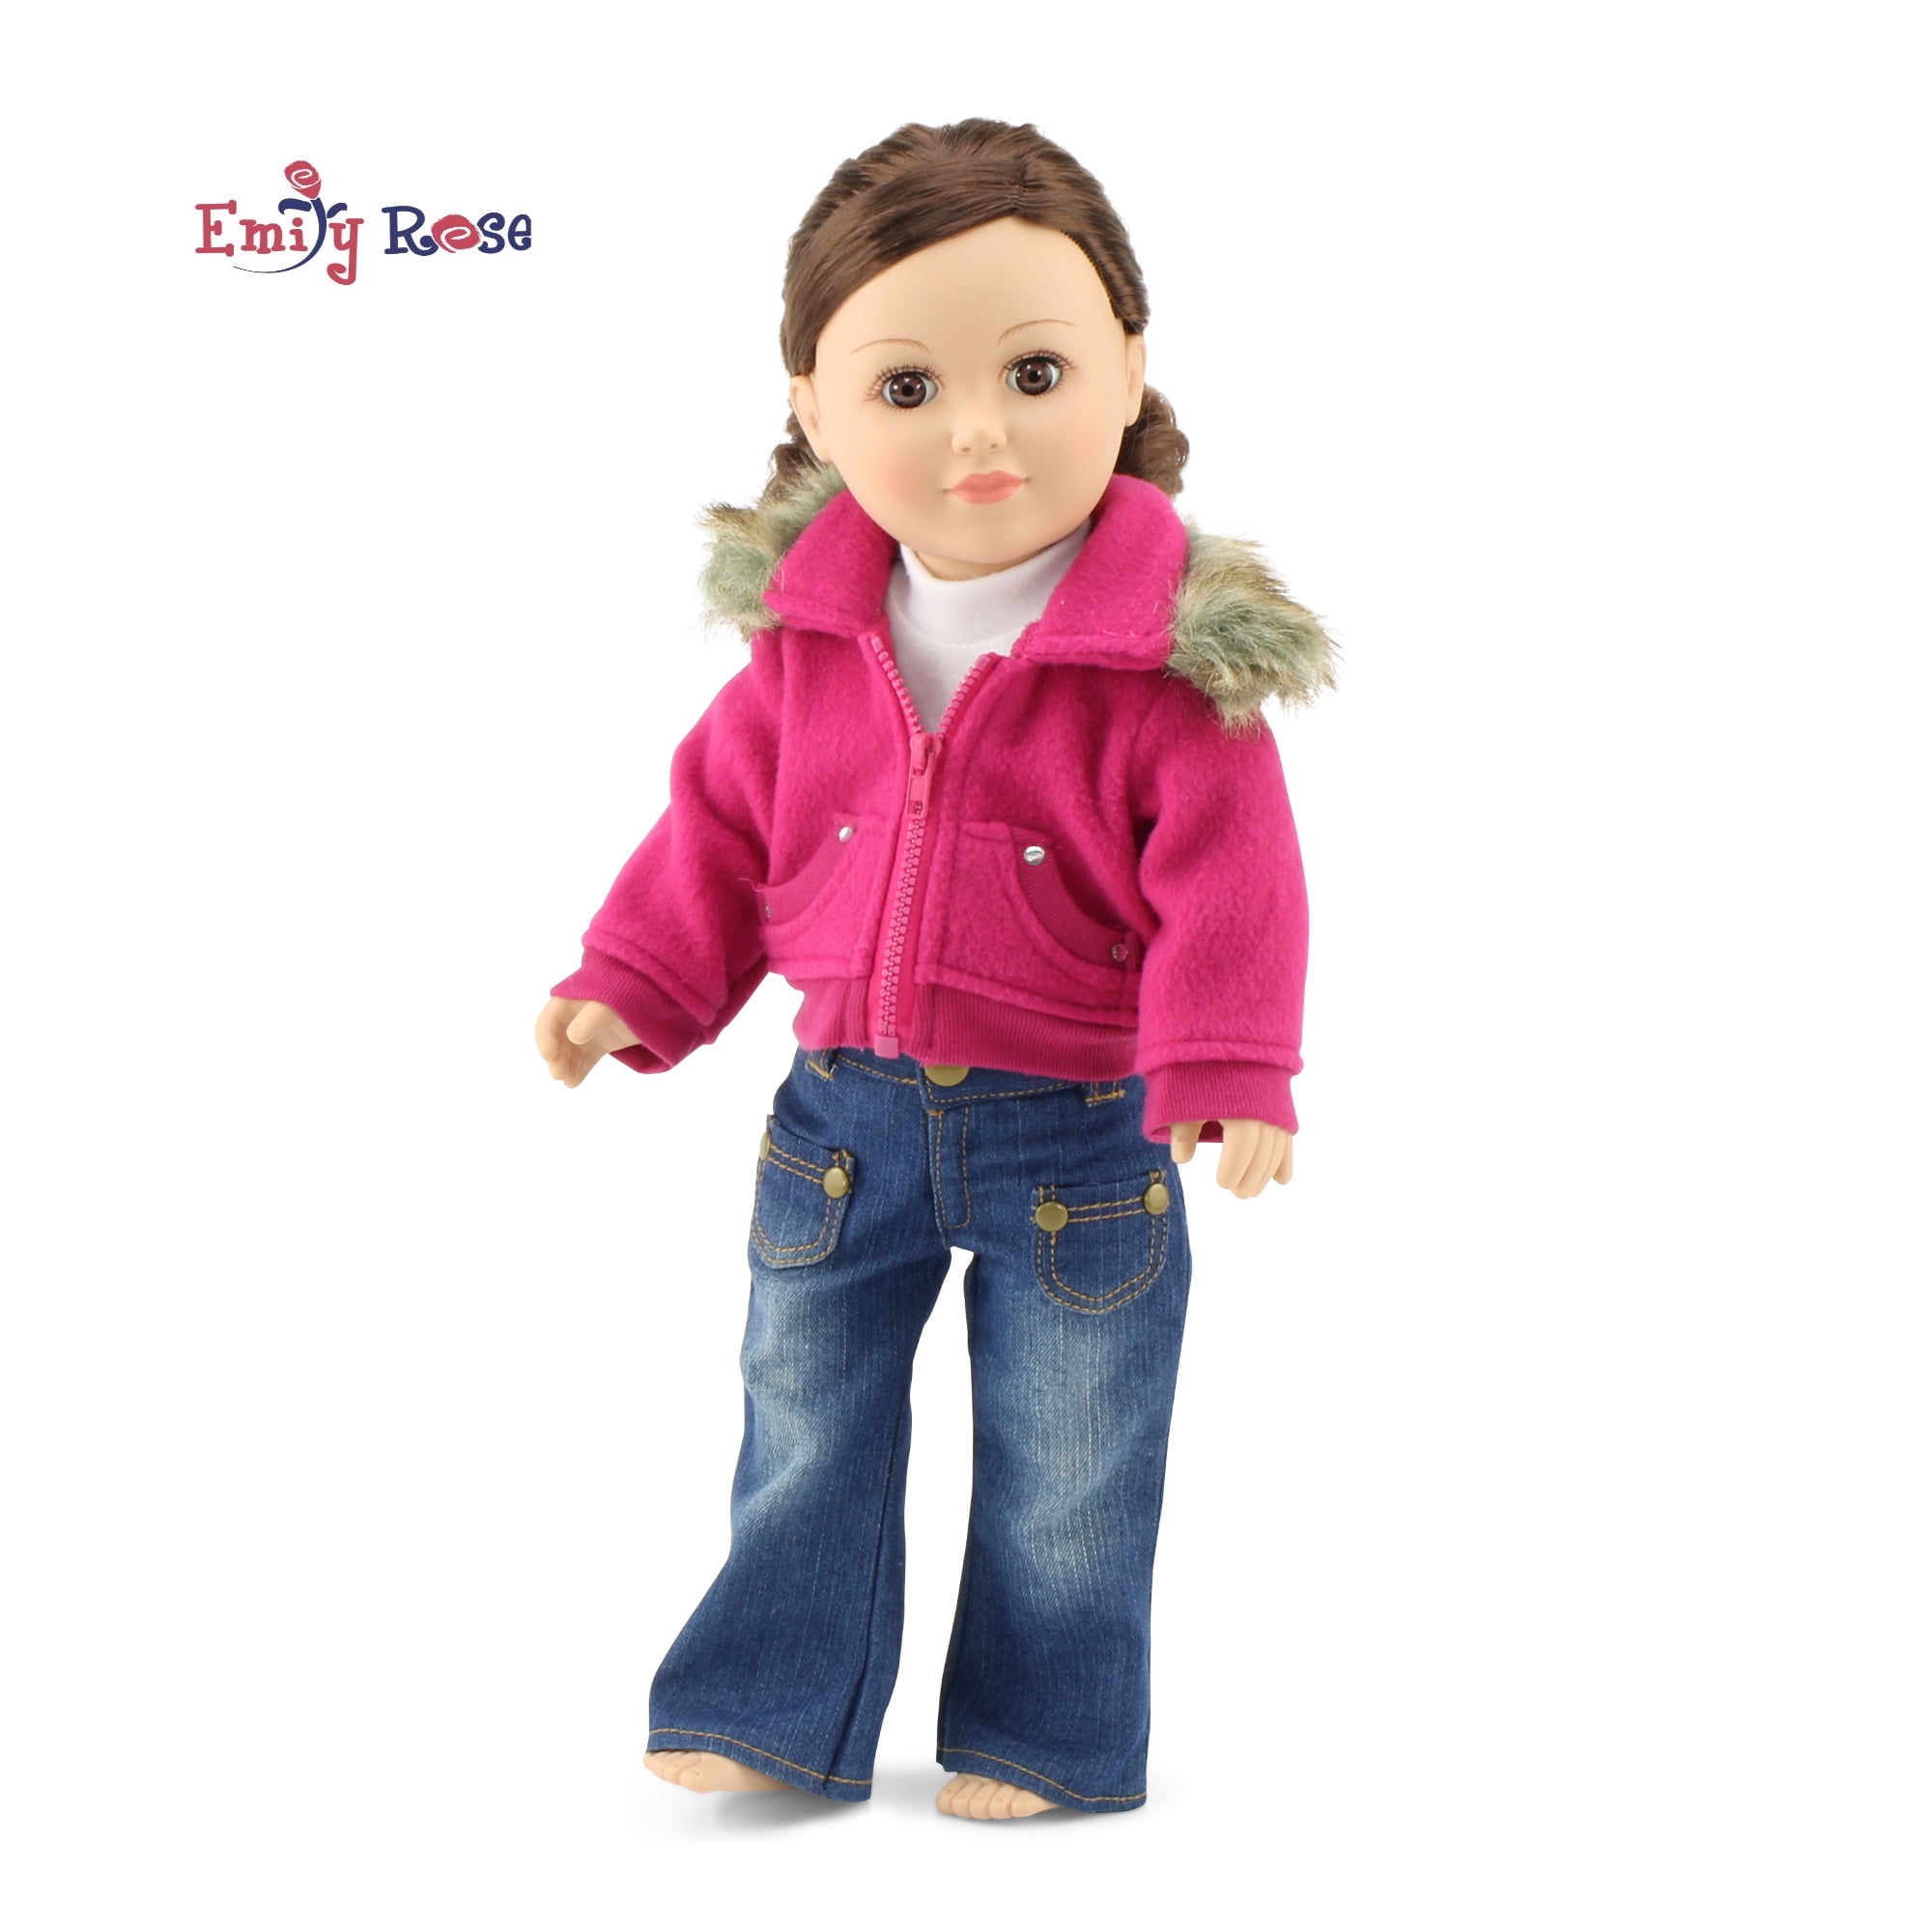 Butterfly Denim Pant Set 18 "Doll Clothes Fits American Girl Dolls